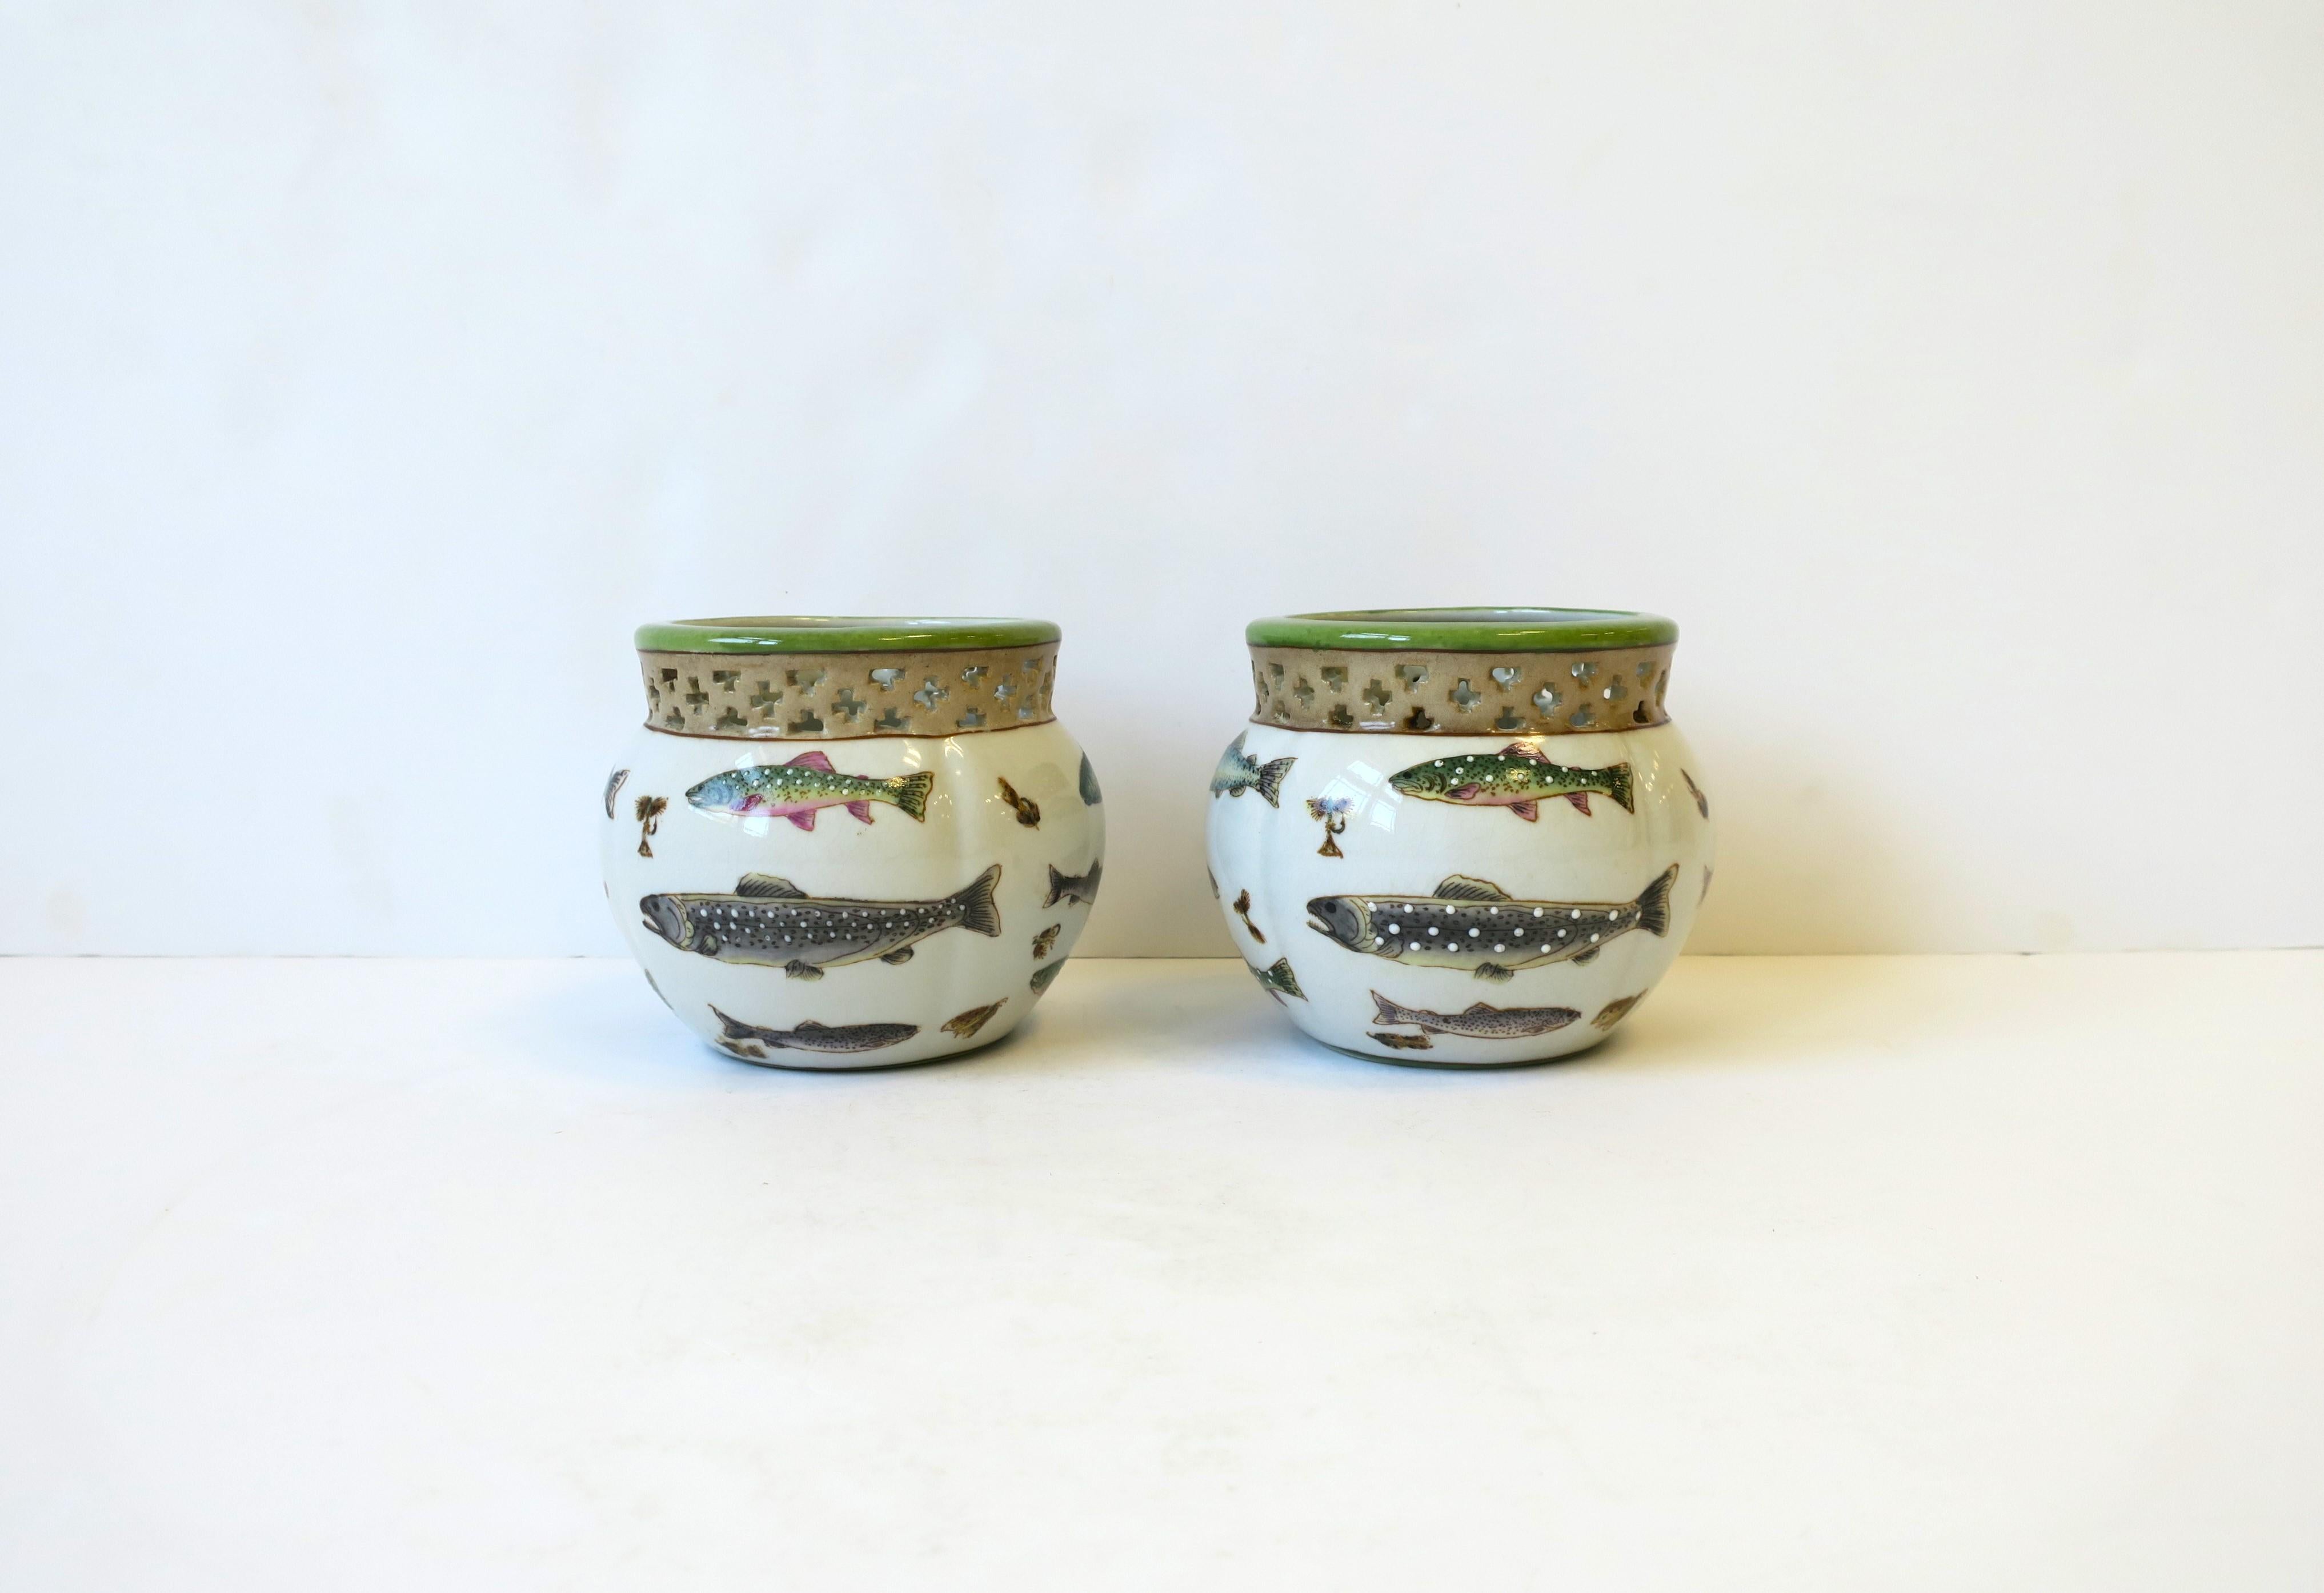 A great pair of ceramic plant or flower planter pots cachepots jardinières with fish and lure design, circa late-20th century. In the Rustic Adirondack style. Bass fish and other fish, and lures in between, surround cachepots. 

Dimensions: 4.5